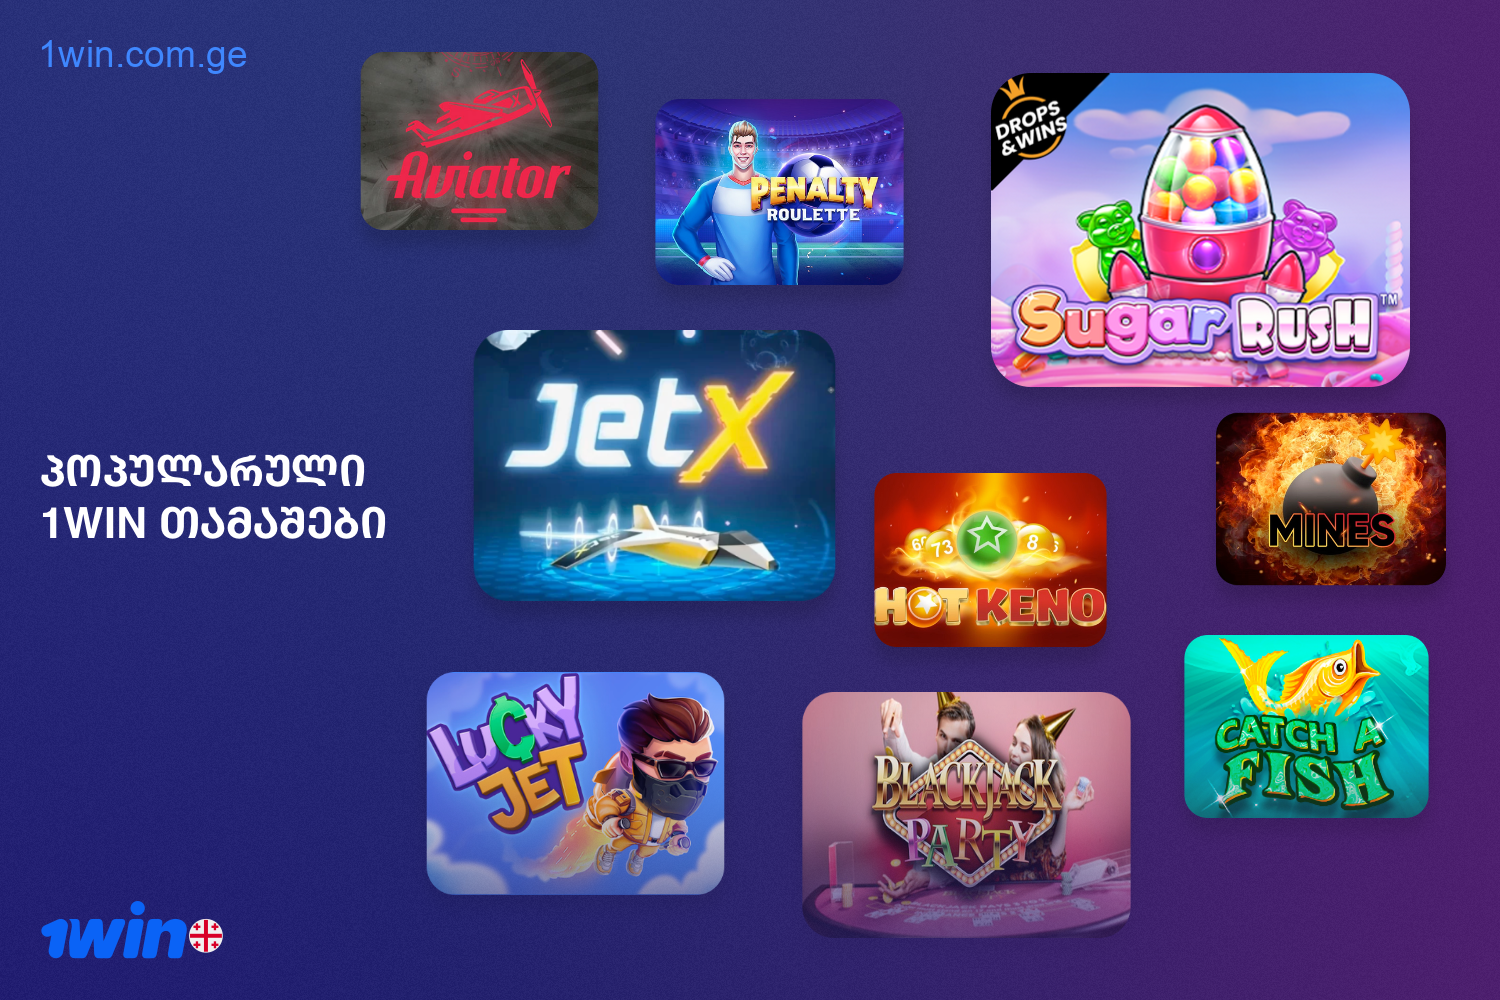 Users from Georgia will find many popular games at 1win